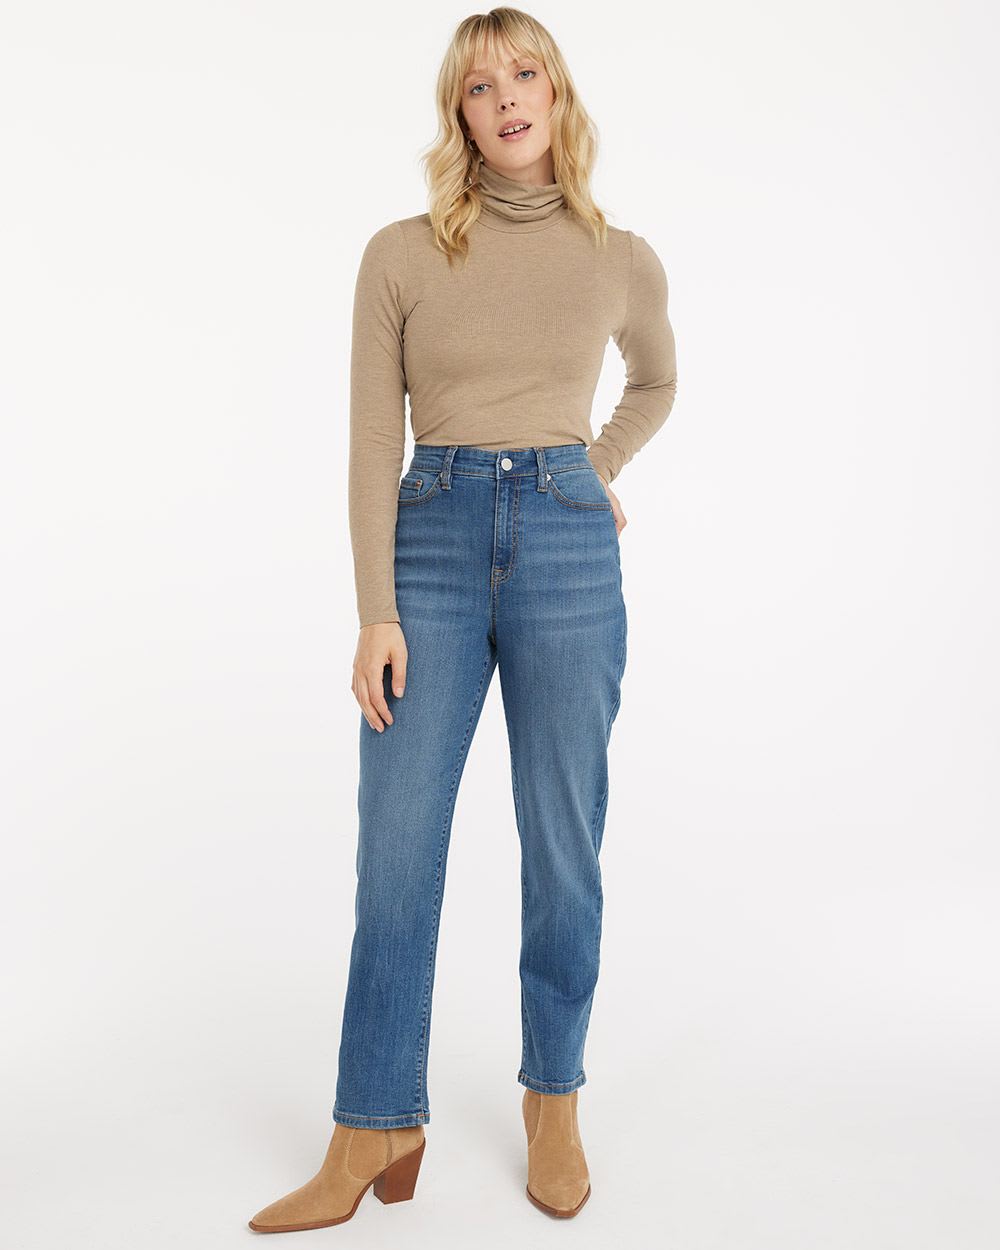 Super High-Rise Medium Wash Ankle Jean with Straight Leg